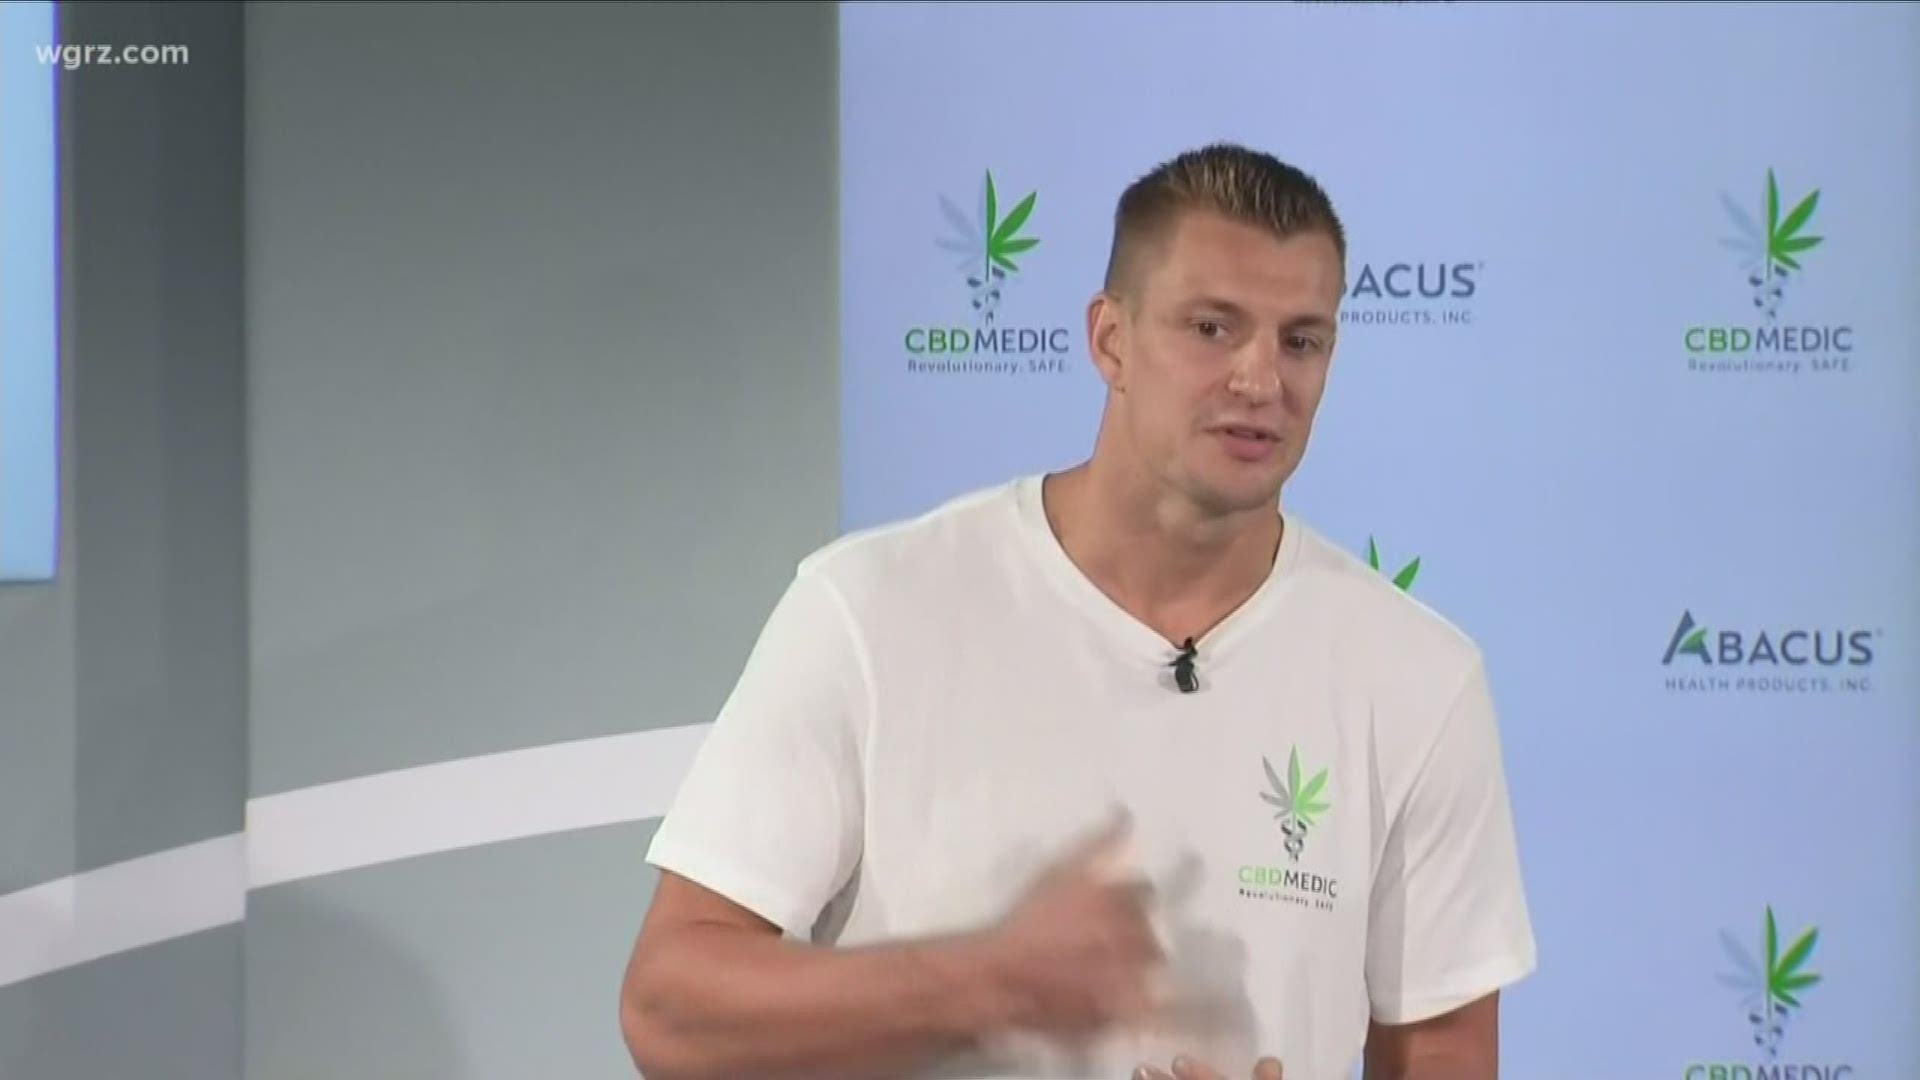 Speaking of CBD, Gronk called on all professional sports to let athletes use it